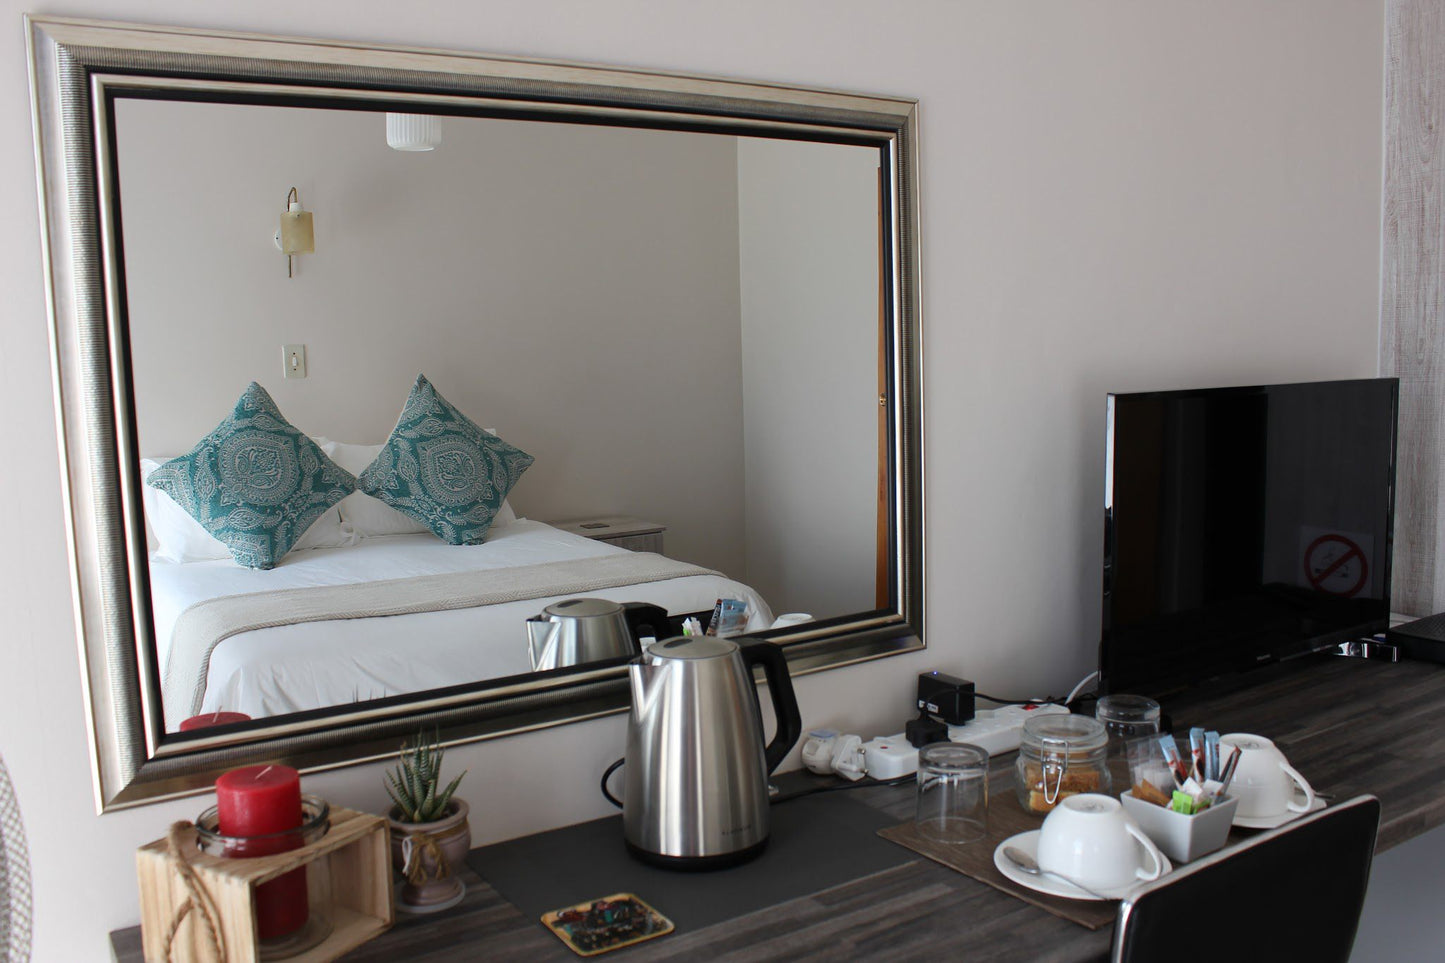 Goedgedacht Guest Rooms Baillie Park Potchefstroom North West Province South Africa Unsaturated, Bedroom